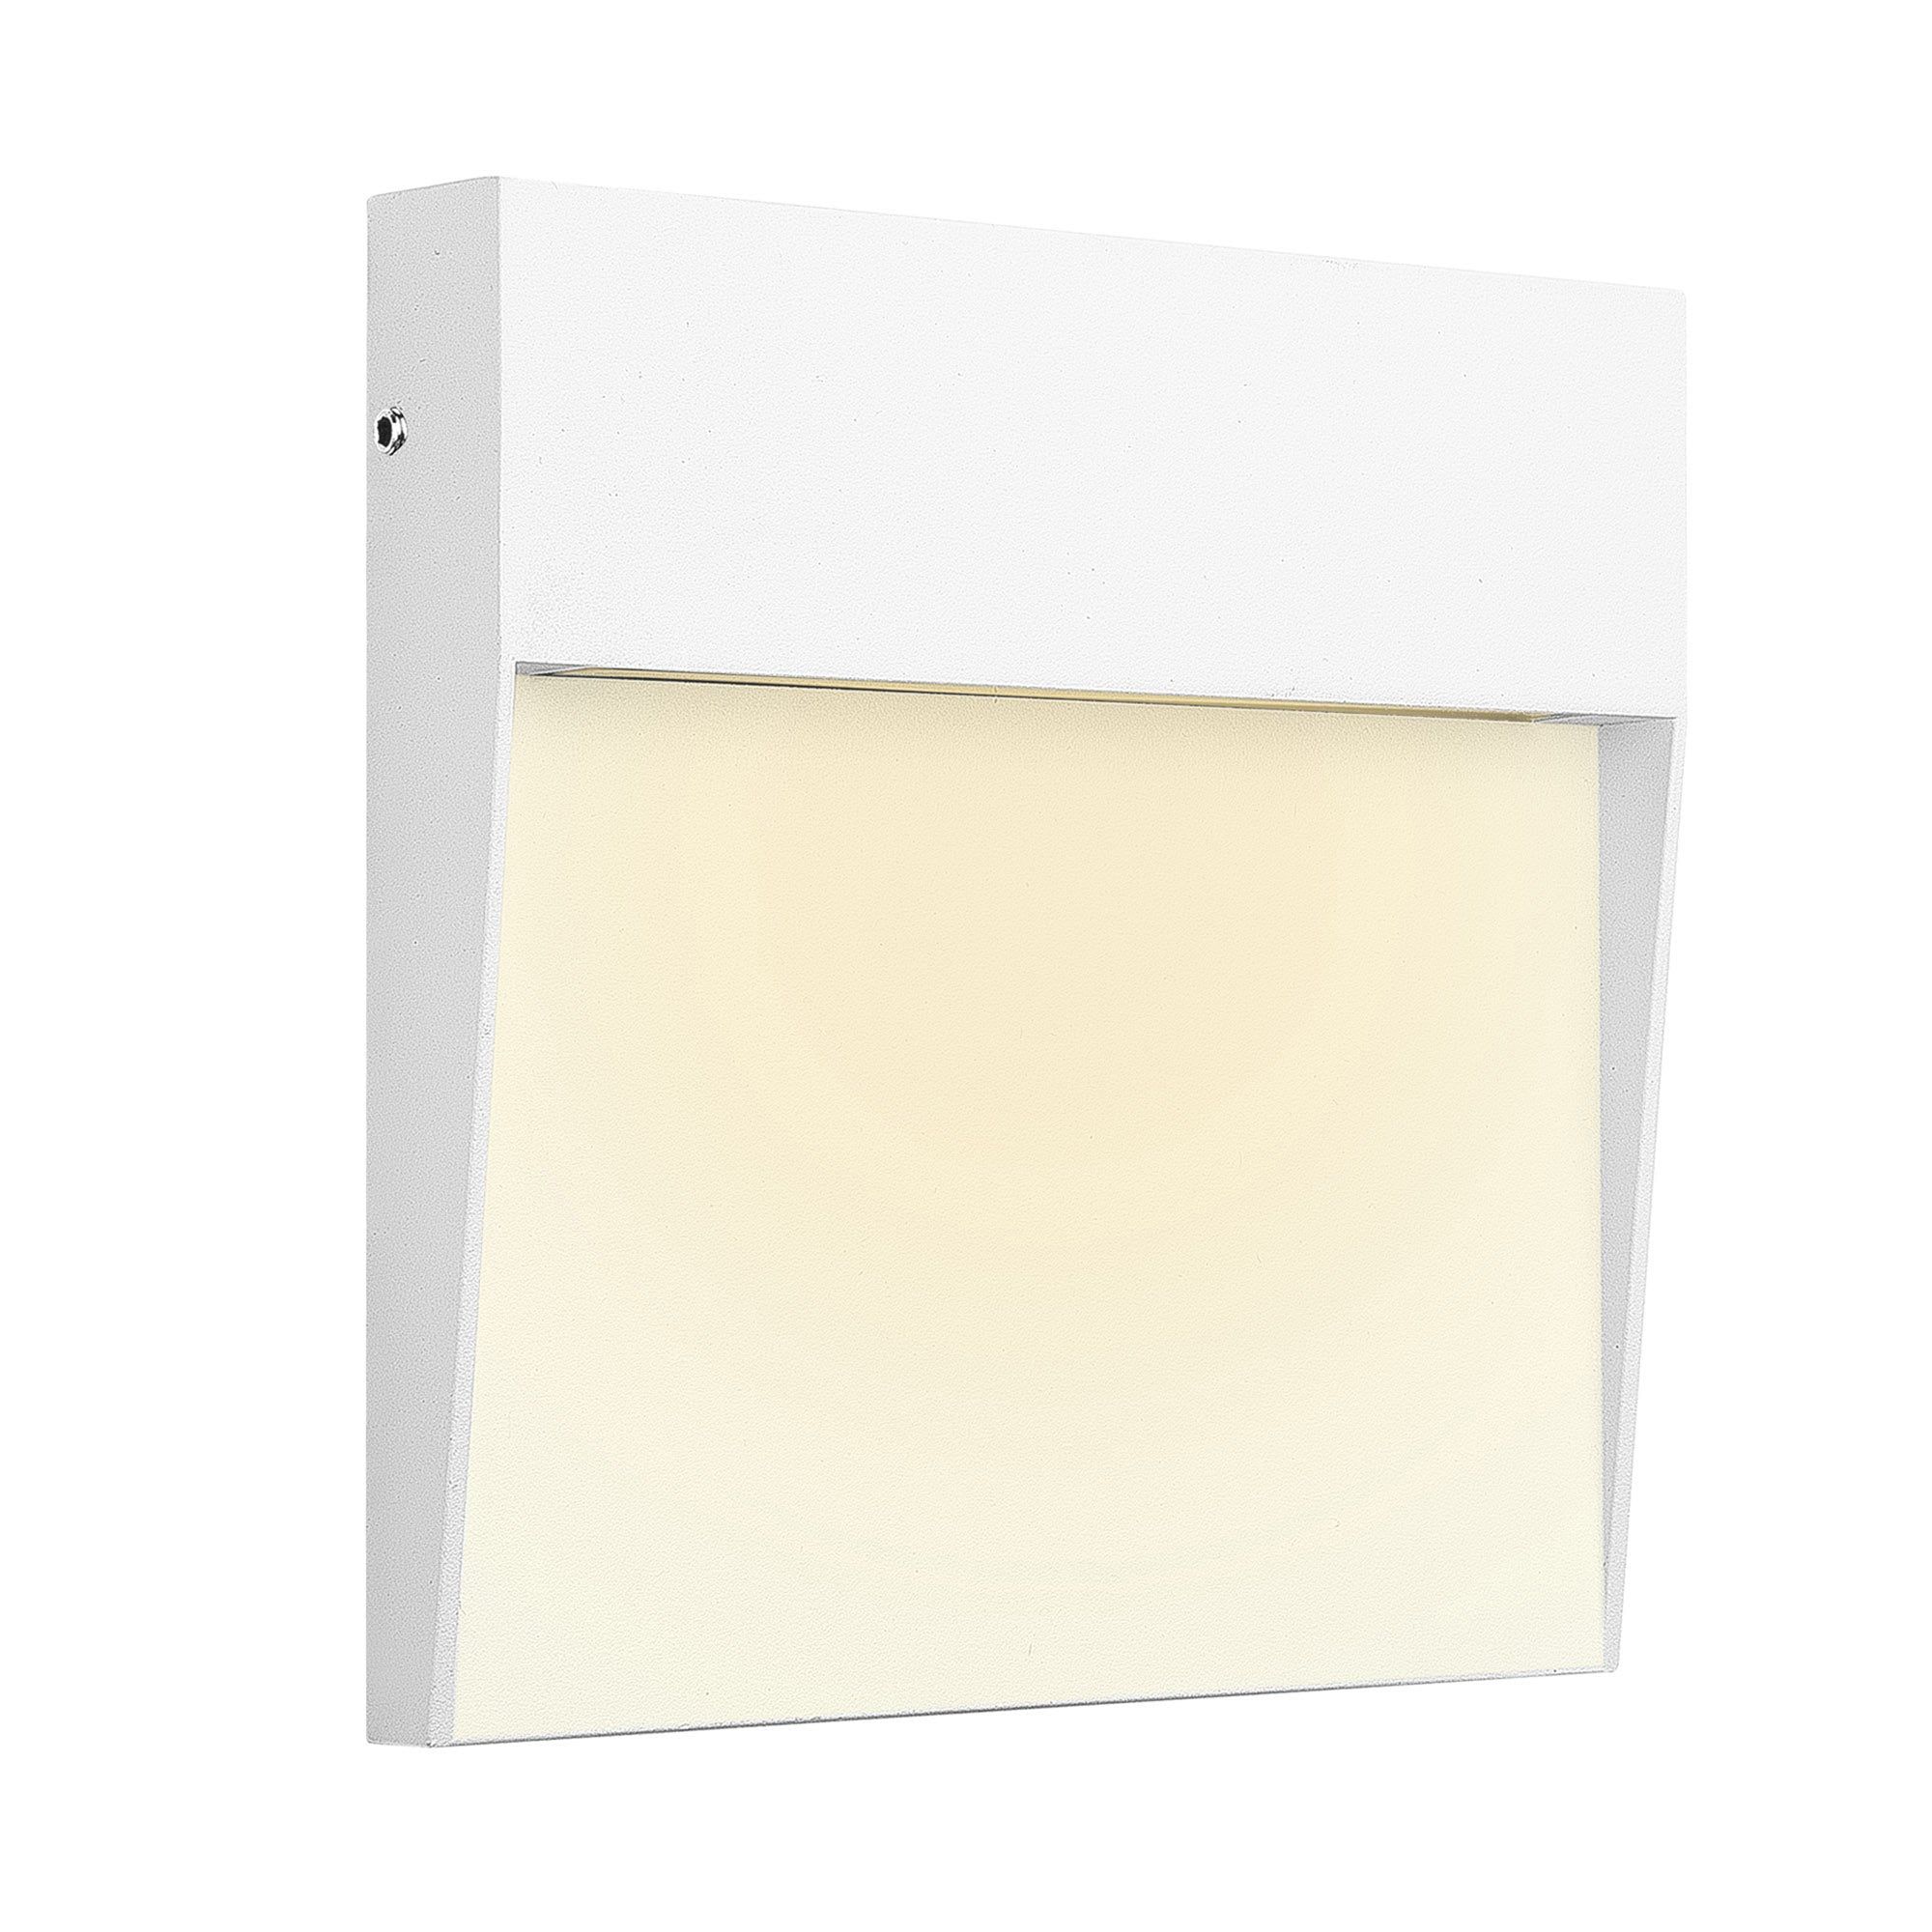 Baker Wall Lamp Small/Medium Square, 3W LED, 3000K, 150lm, IP54, Sand White, Anthracite, Rust Brown